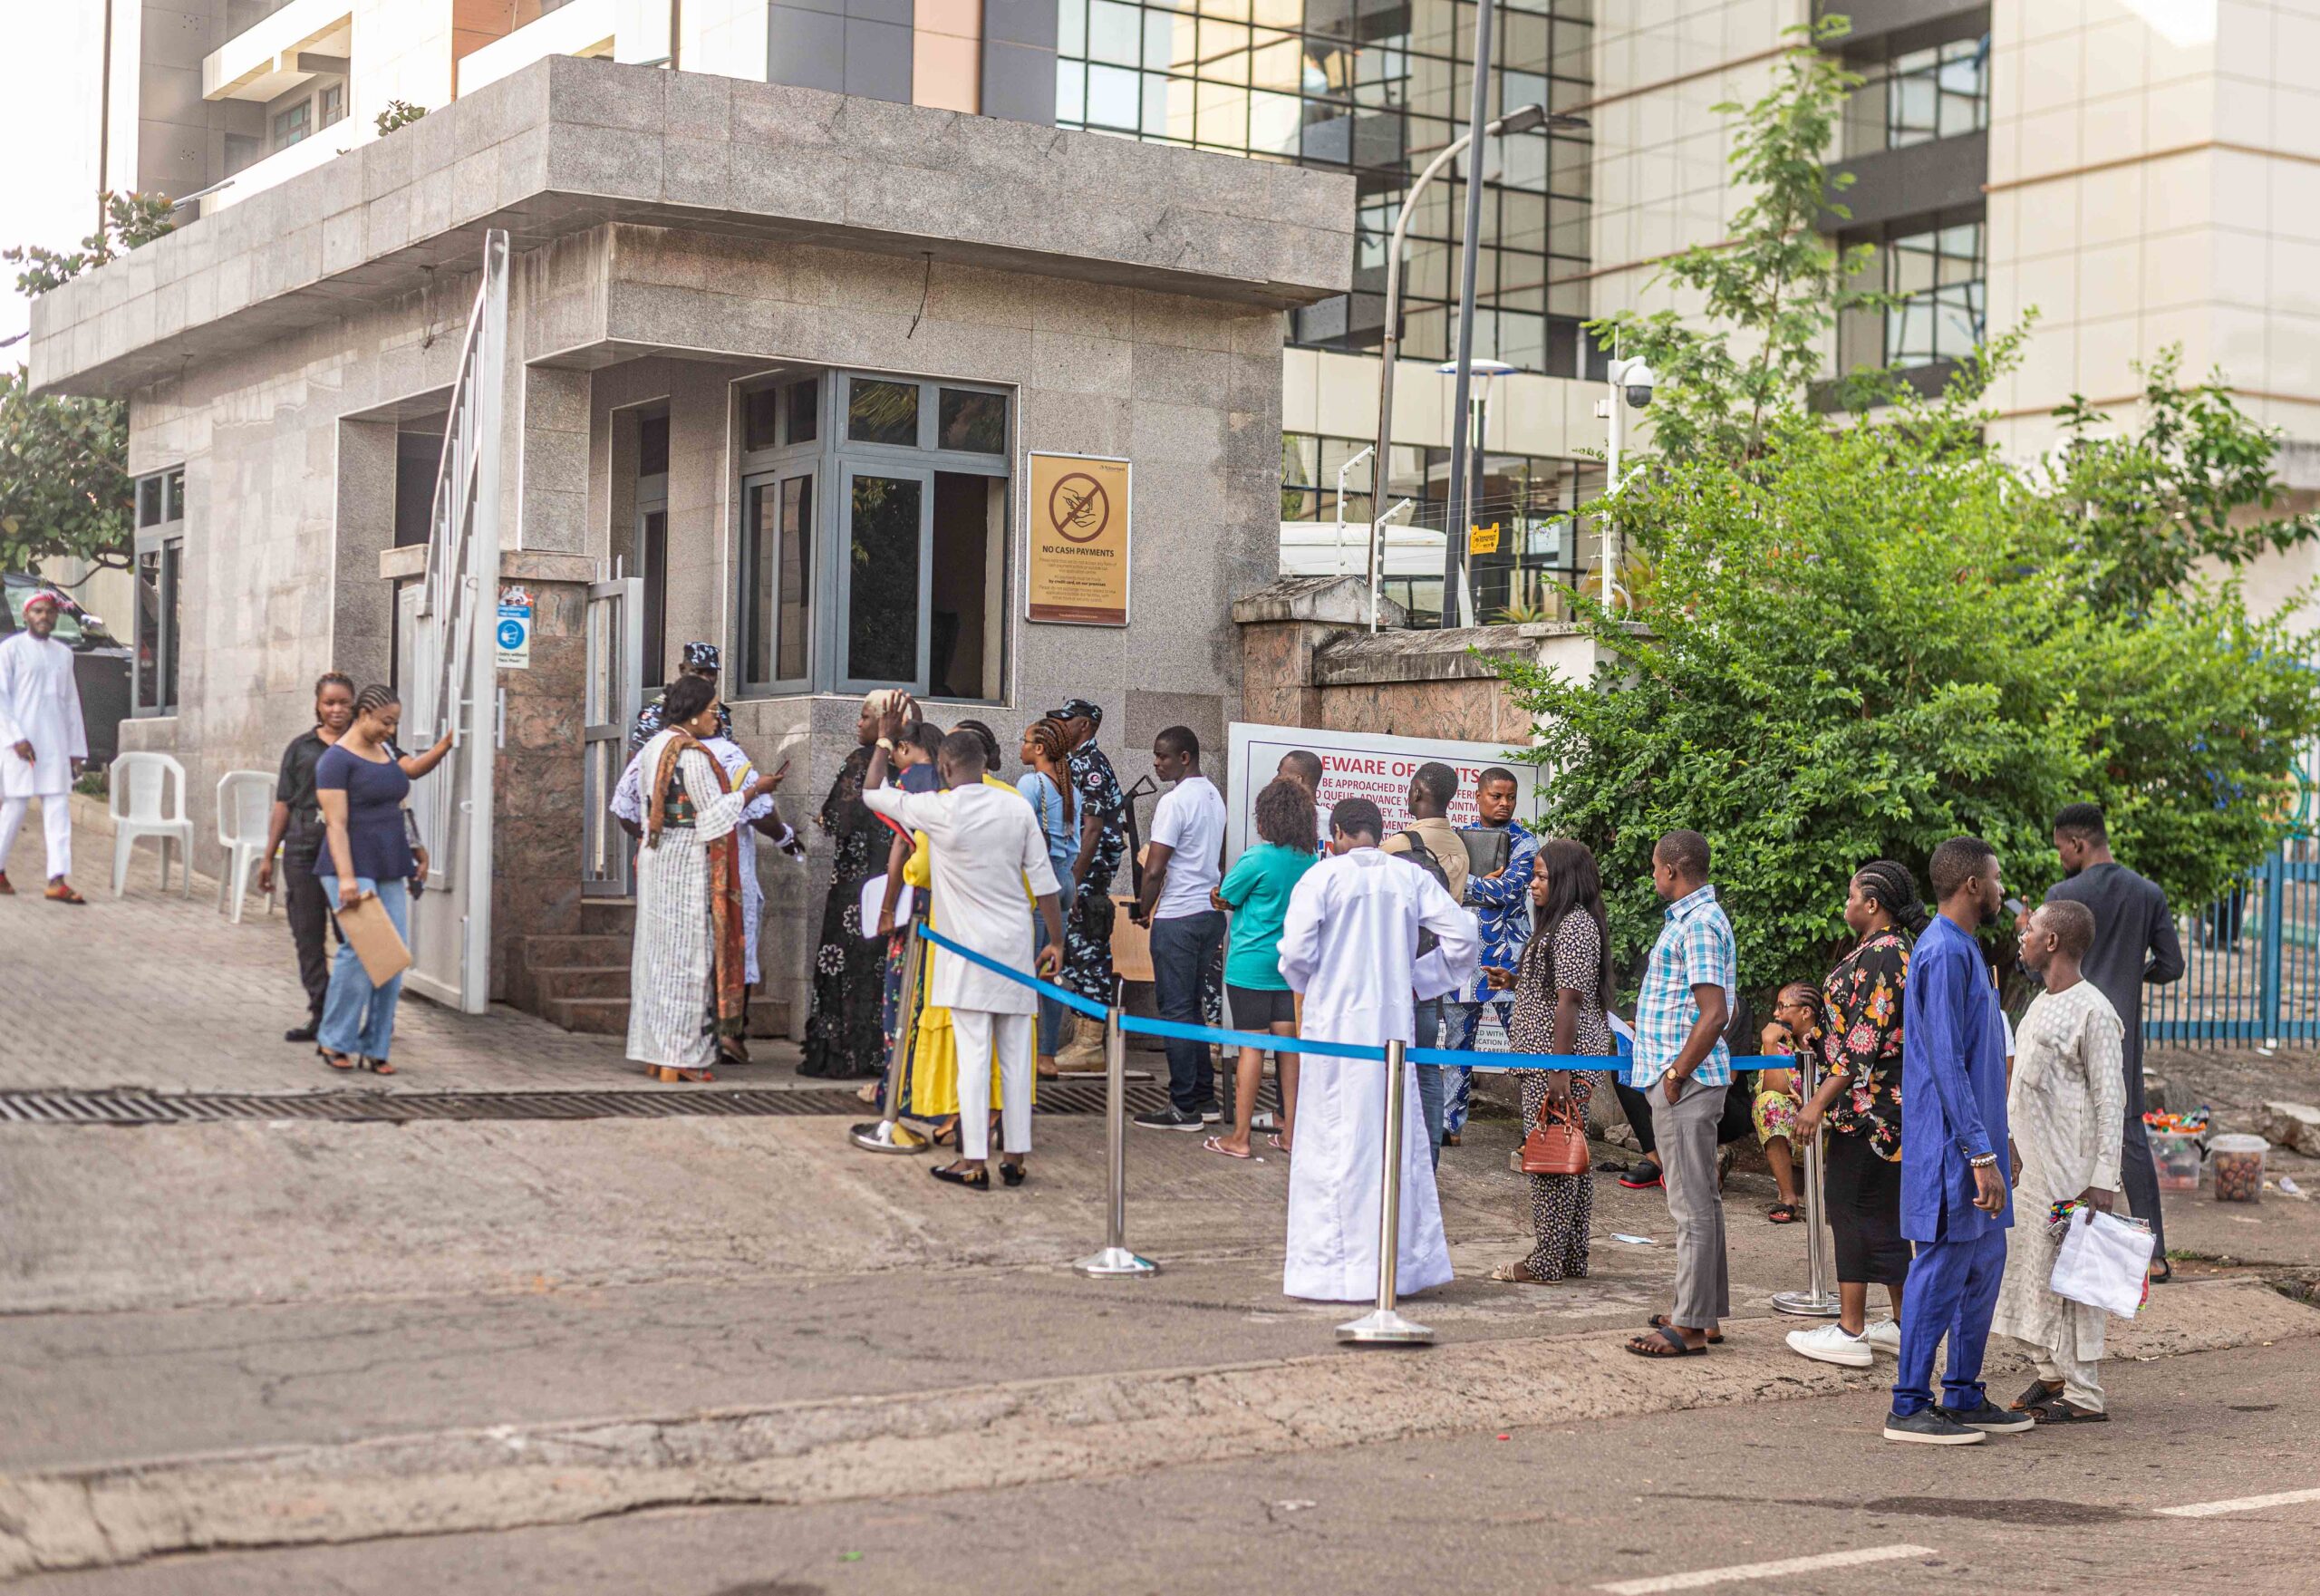 Visa applicants stand in line, anticipating entry into the visa office in Muktar El Yakub Plaza Abuja. Photo by David Exodus